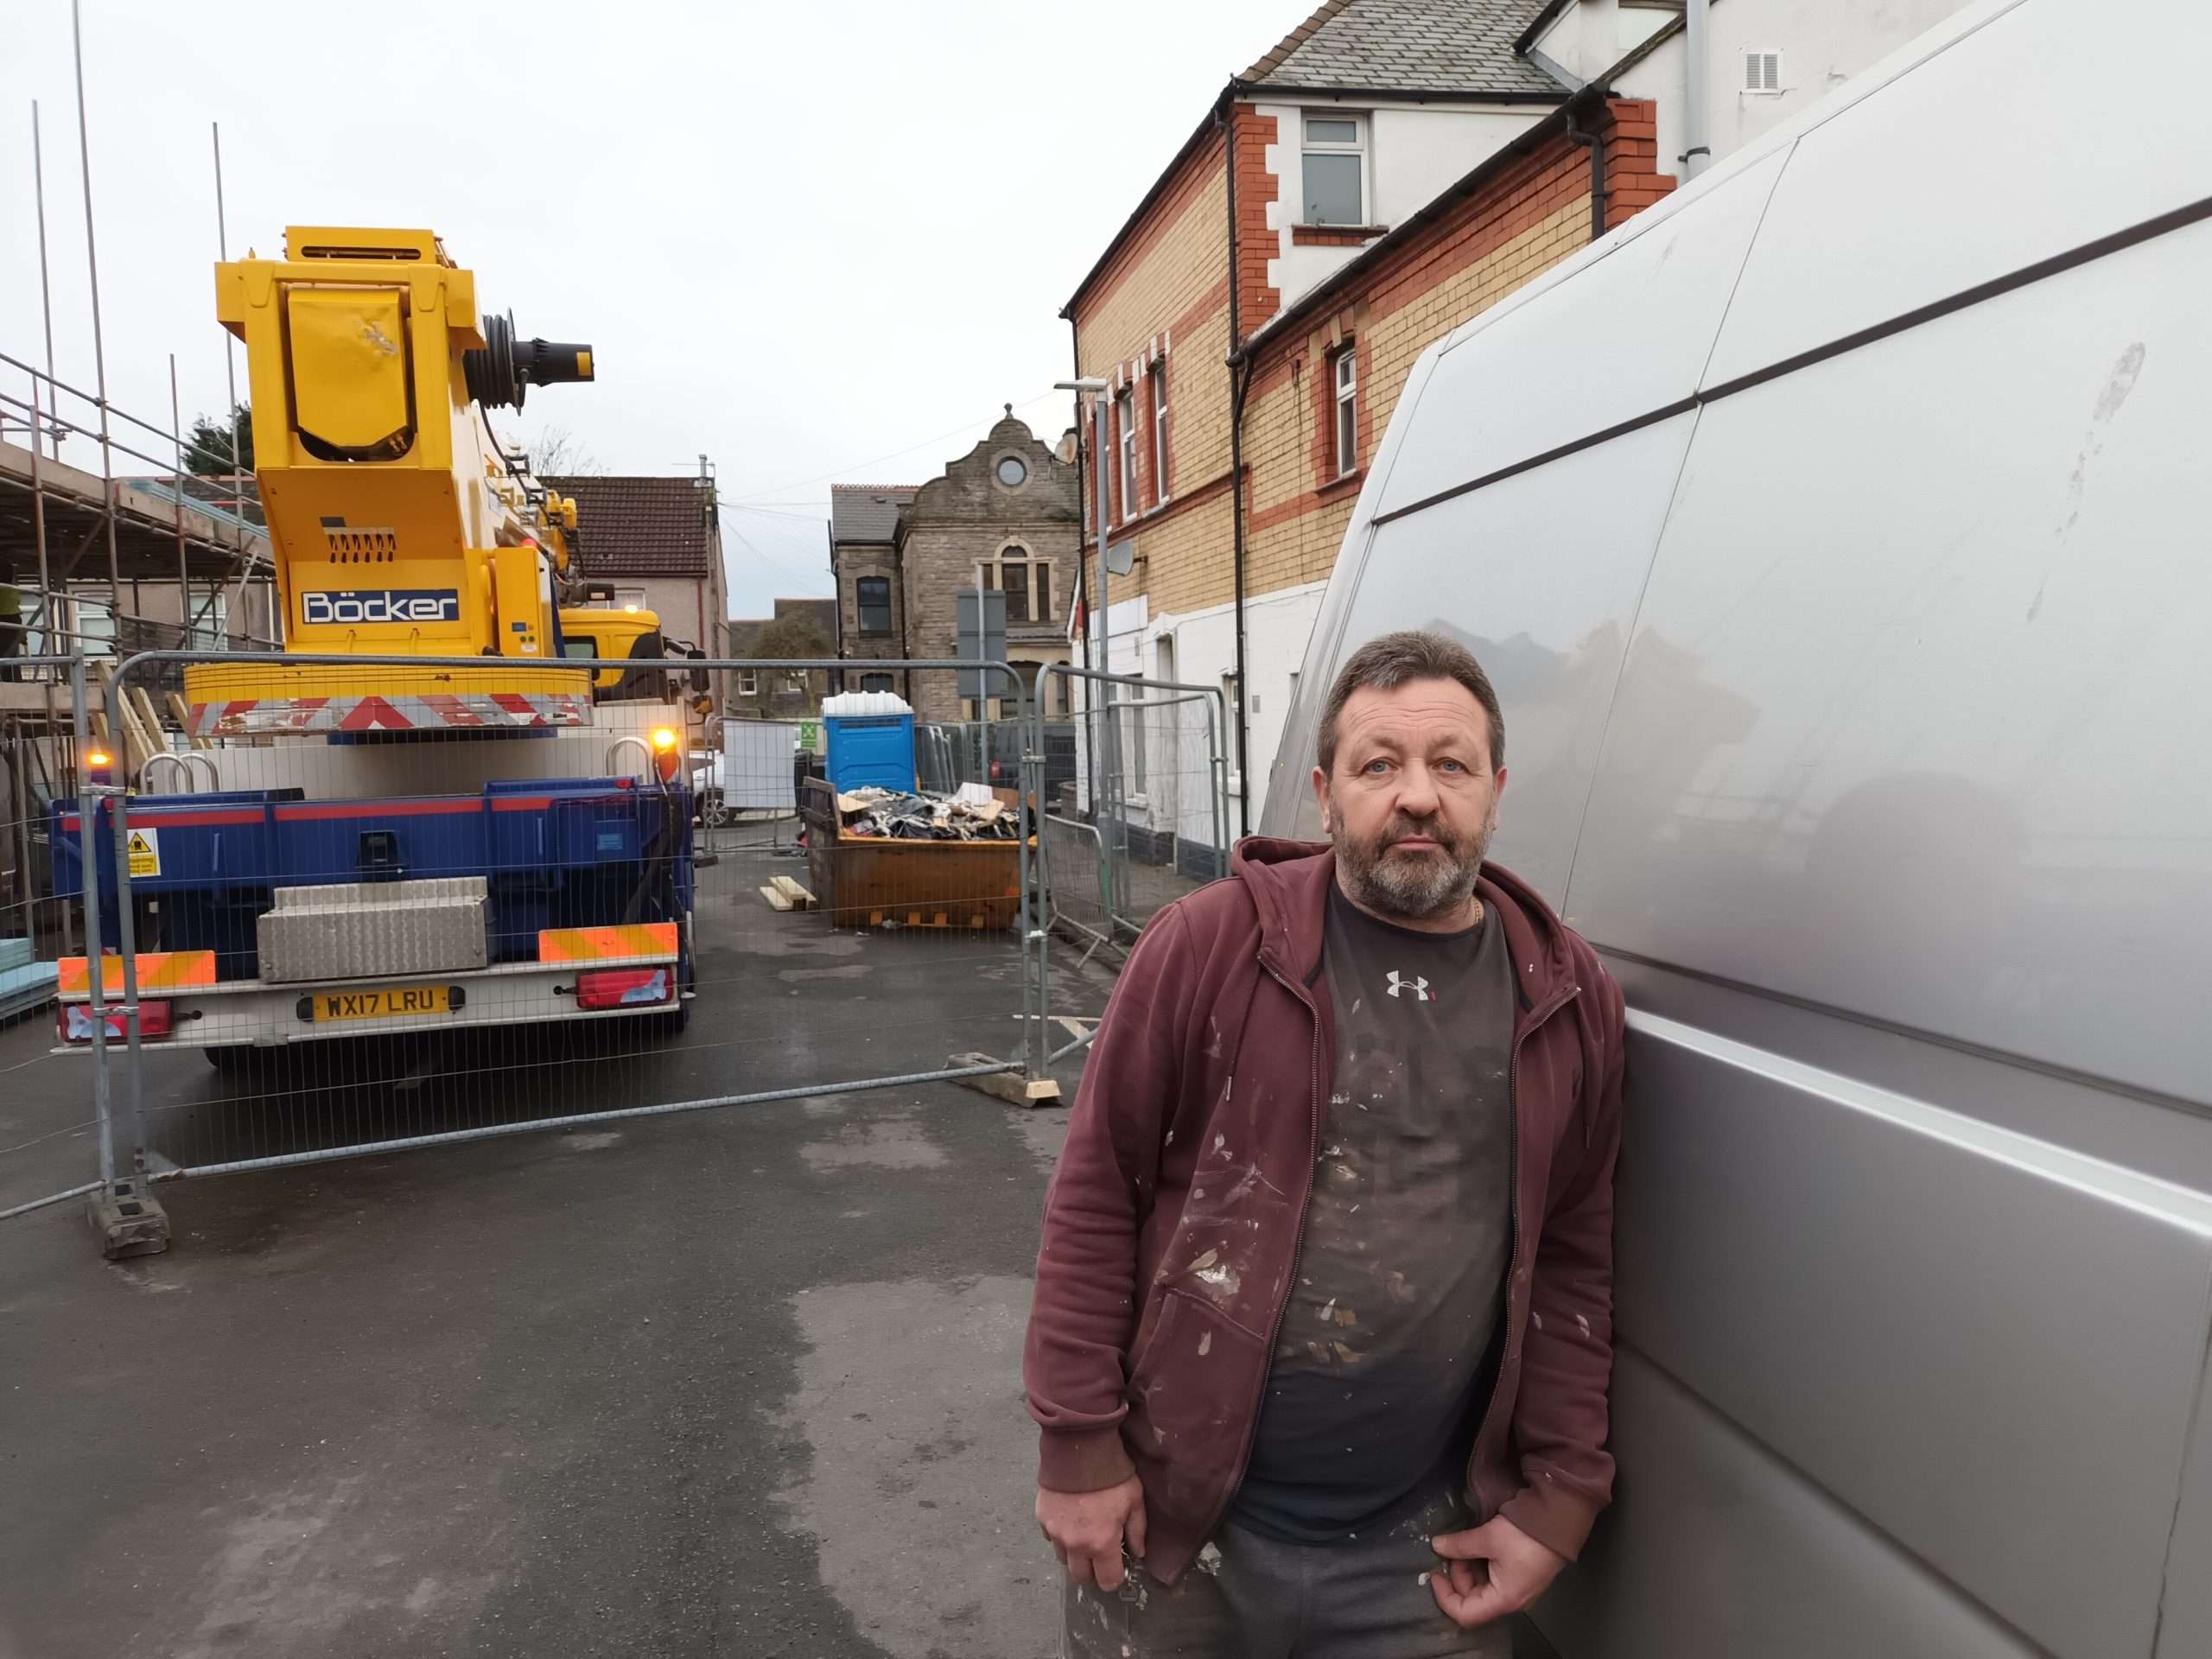 Cardiff builder voices frustration over inaccessible driveway